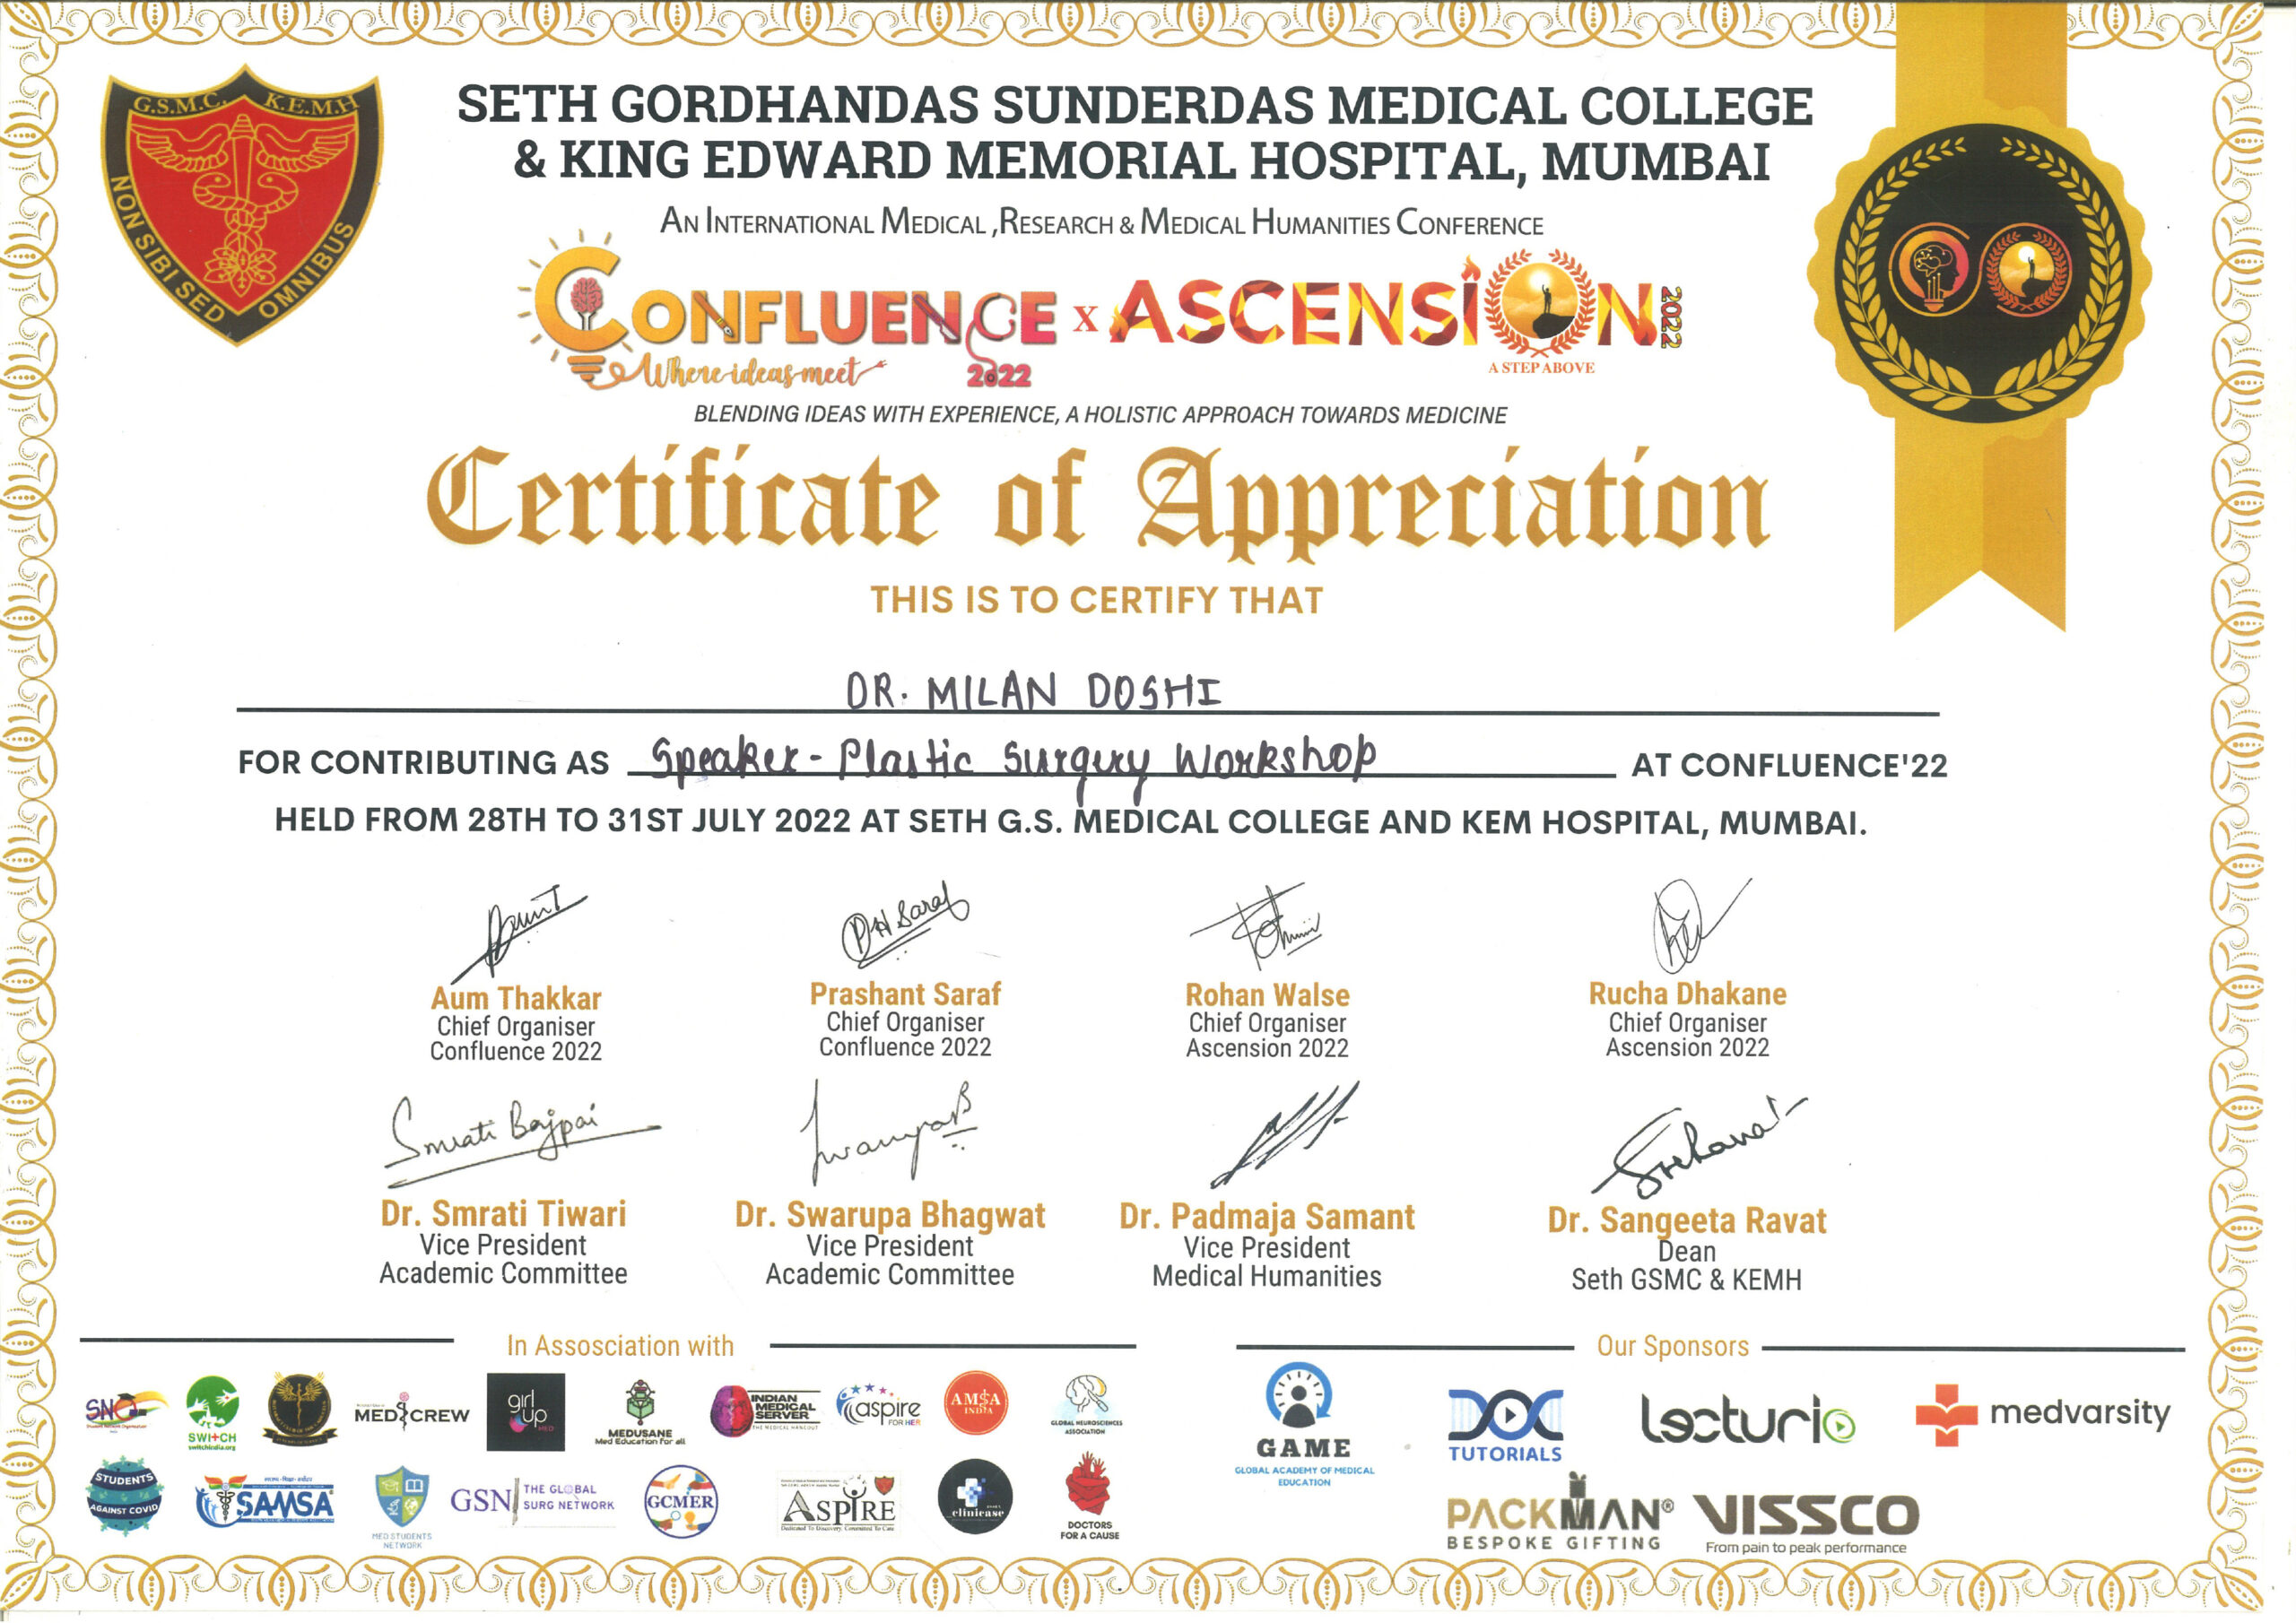 Ascension 2022, from 28th to 31st July 2022 at Seth G.S. Medicial College and KEM Hospital, Mumbai